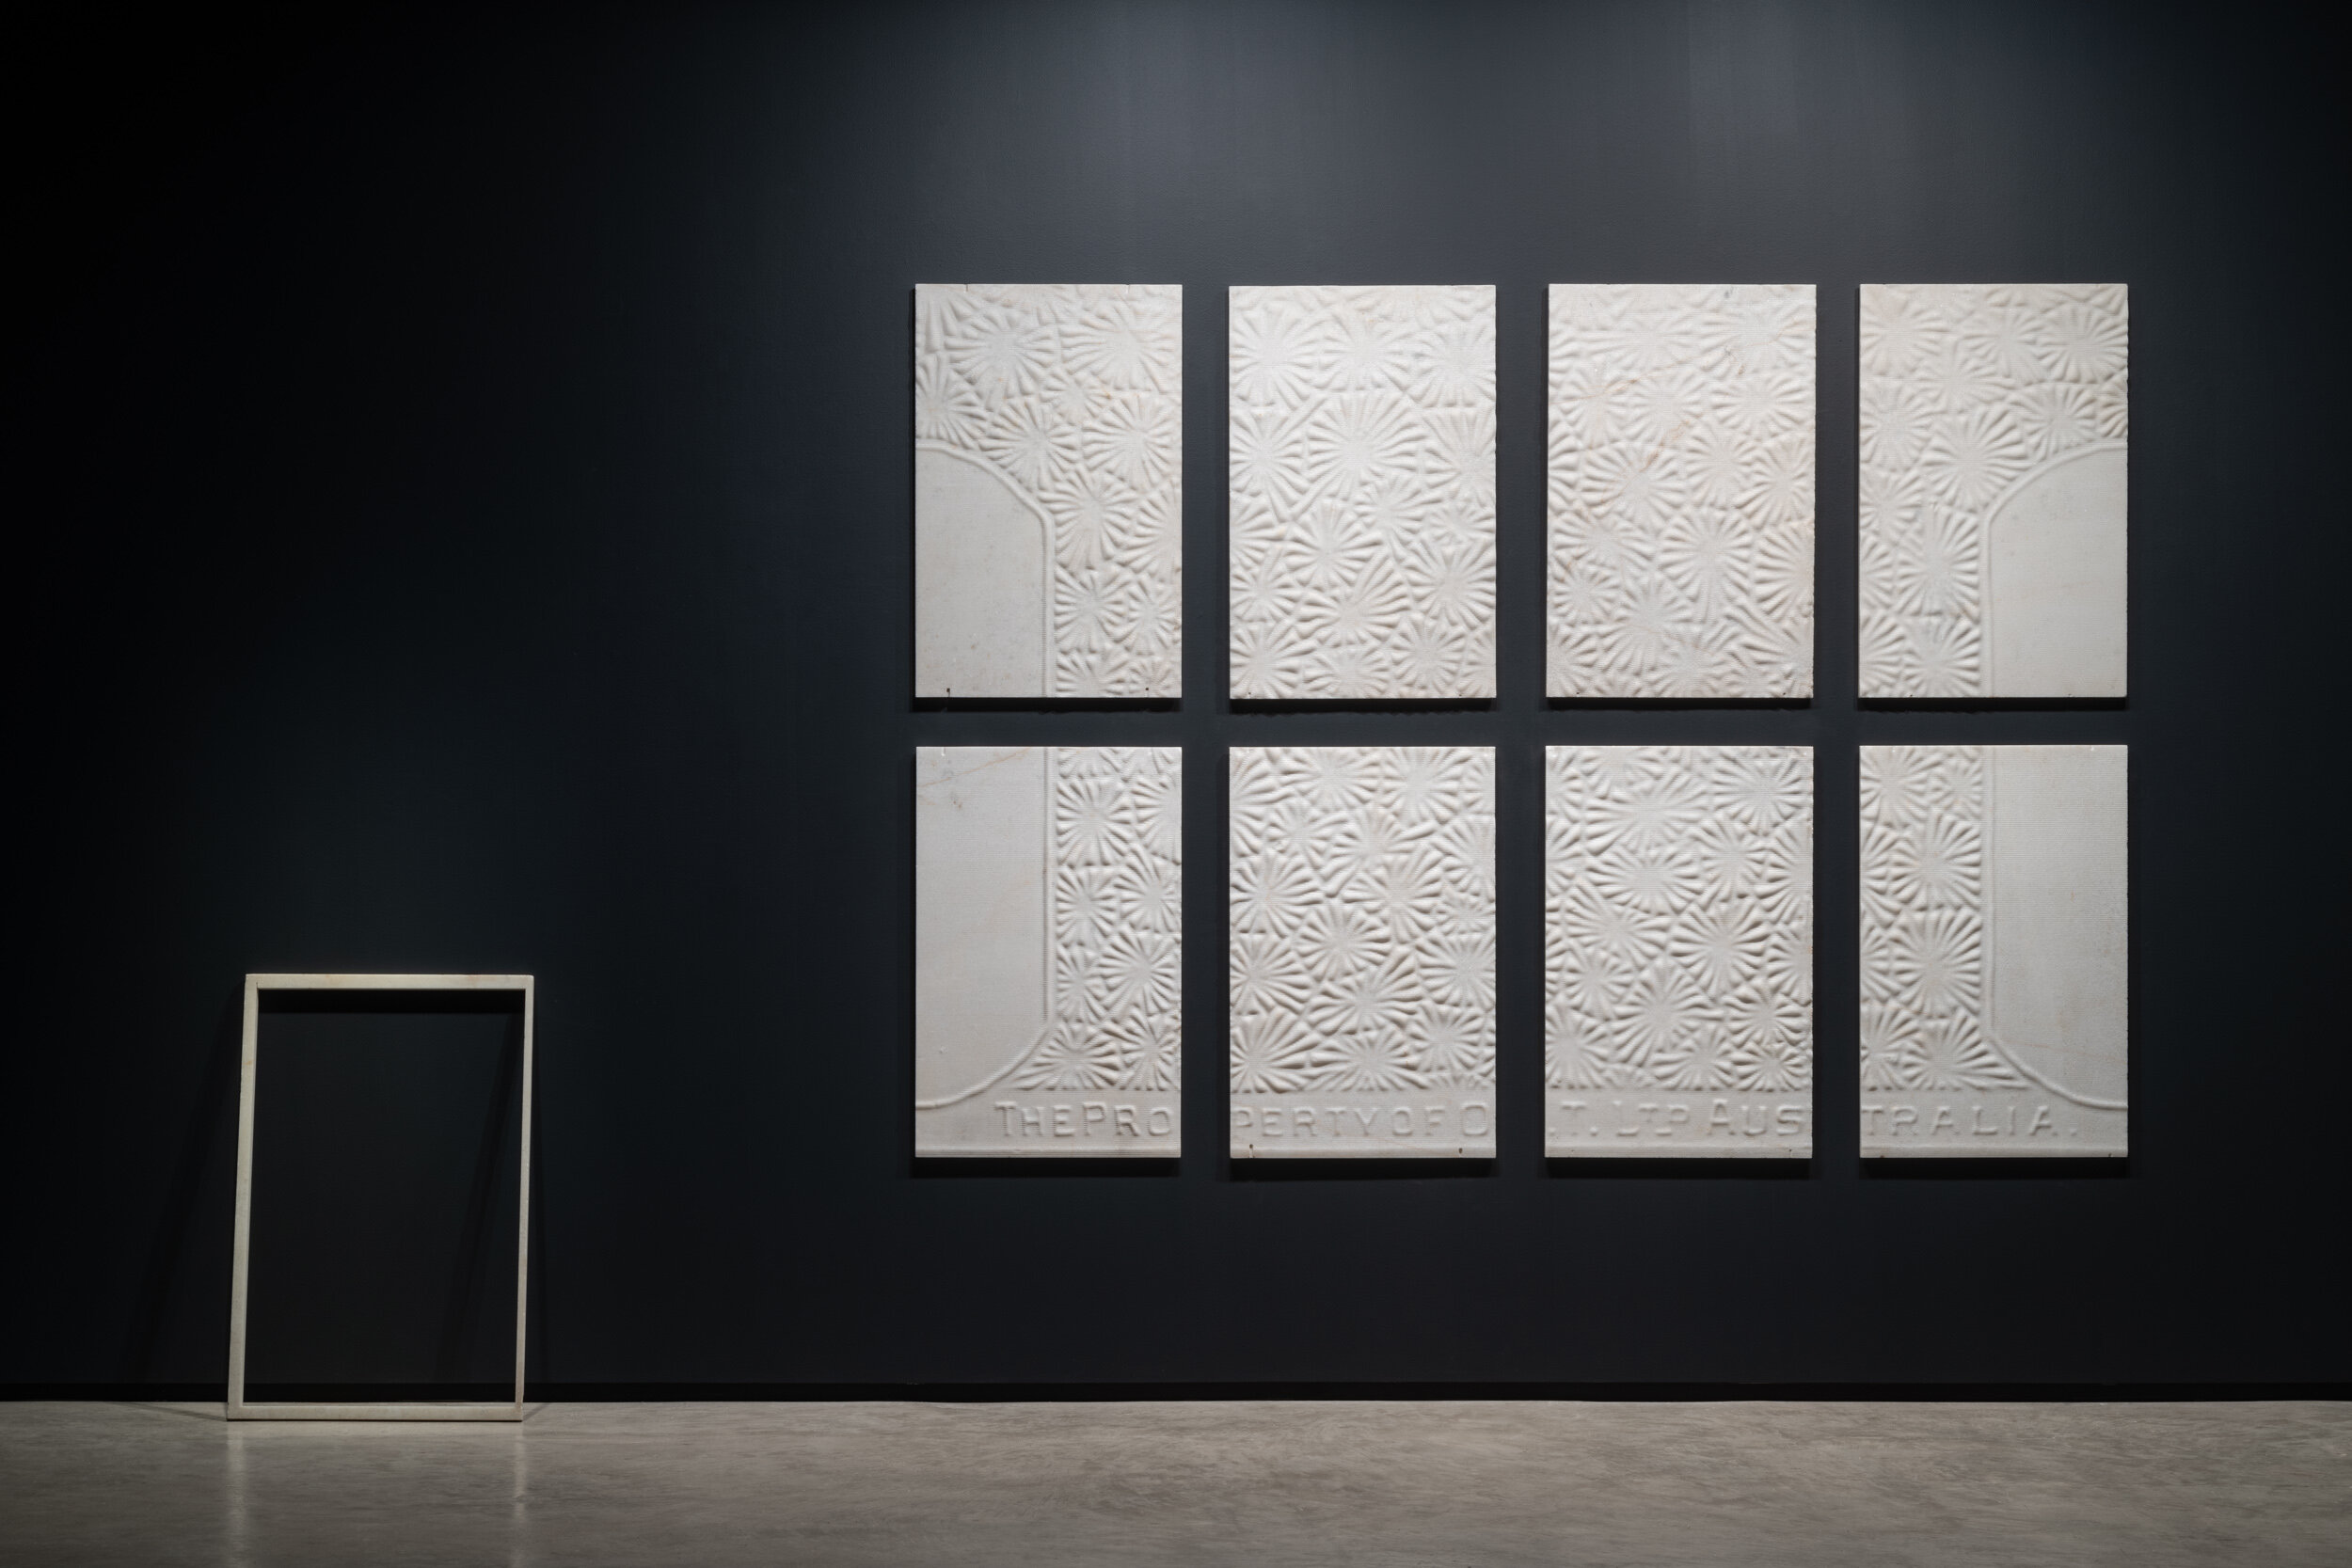  L-R: The Unremembered, 2020. Wombeyan Marble panel of the old Commonwealth Bank, George St, Sydney, 91 x 59 x 2.5cm.   History is Buried In My Backyard, 2020. Wombeyan marble, 180 x 250cm (8 panels at 85x 55cm each).   